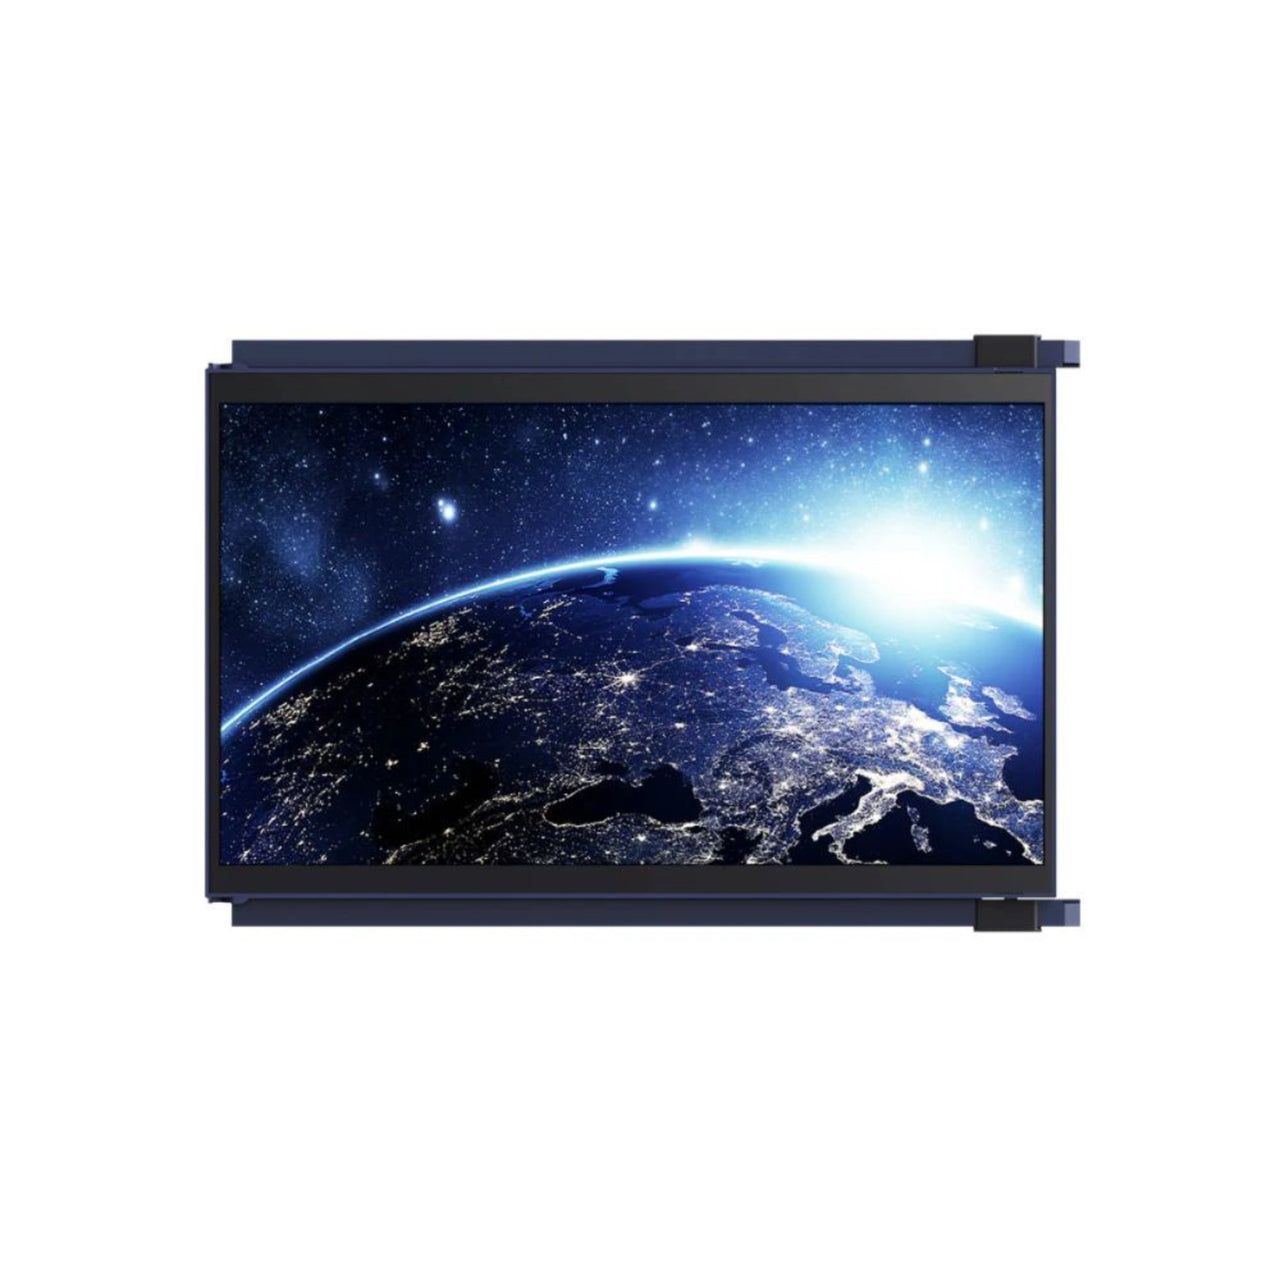 Mobile Pixels Duex Max Portable Laptop Monitor 14.1 inch (Navy) available in Australia from Sammat Education